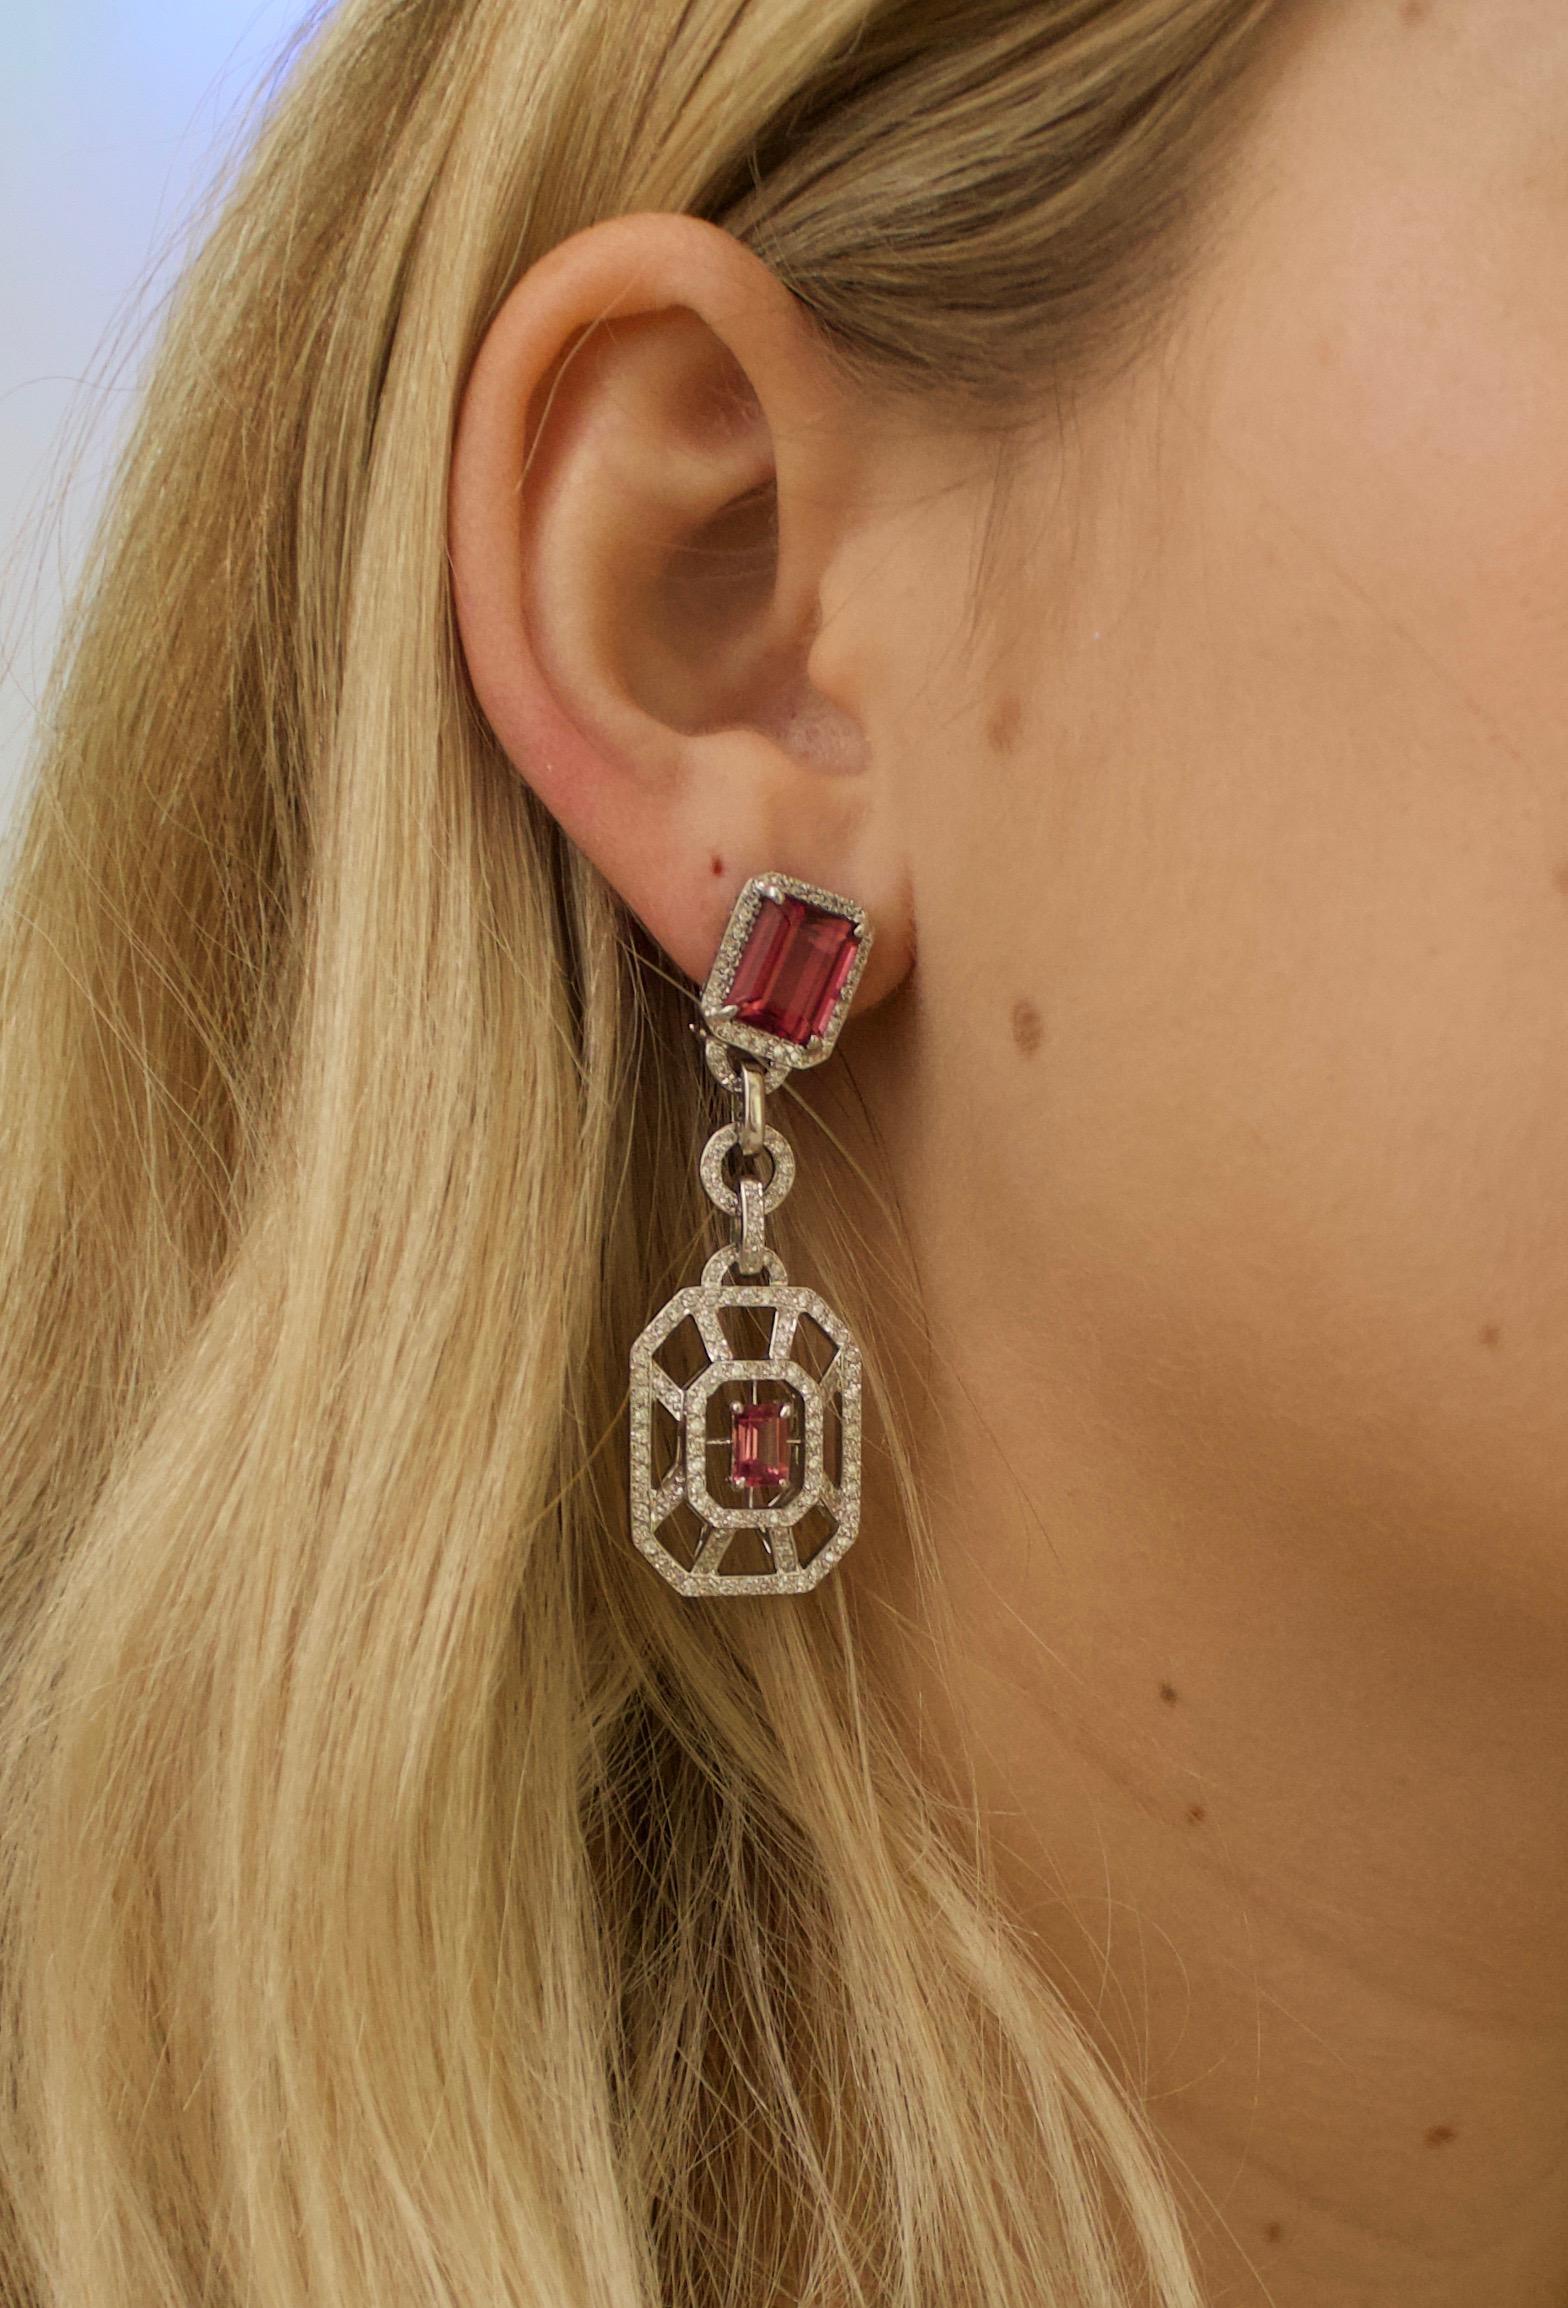 Pink Tourmaline and Diamond Dangling Earrings in 18k White Gold
Two Emerald Cut  Cut Pink Tourmalines Weighing 7.20 Carats Approximately 
Two Emerald Cut  Cut Pink Tourmalines Weighing 1.20 Carats Approximately 
292 Round Brilliant Cut Diamonds